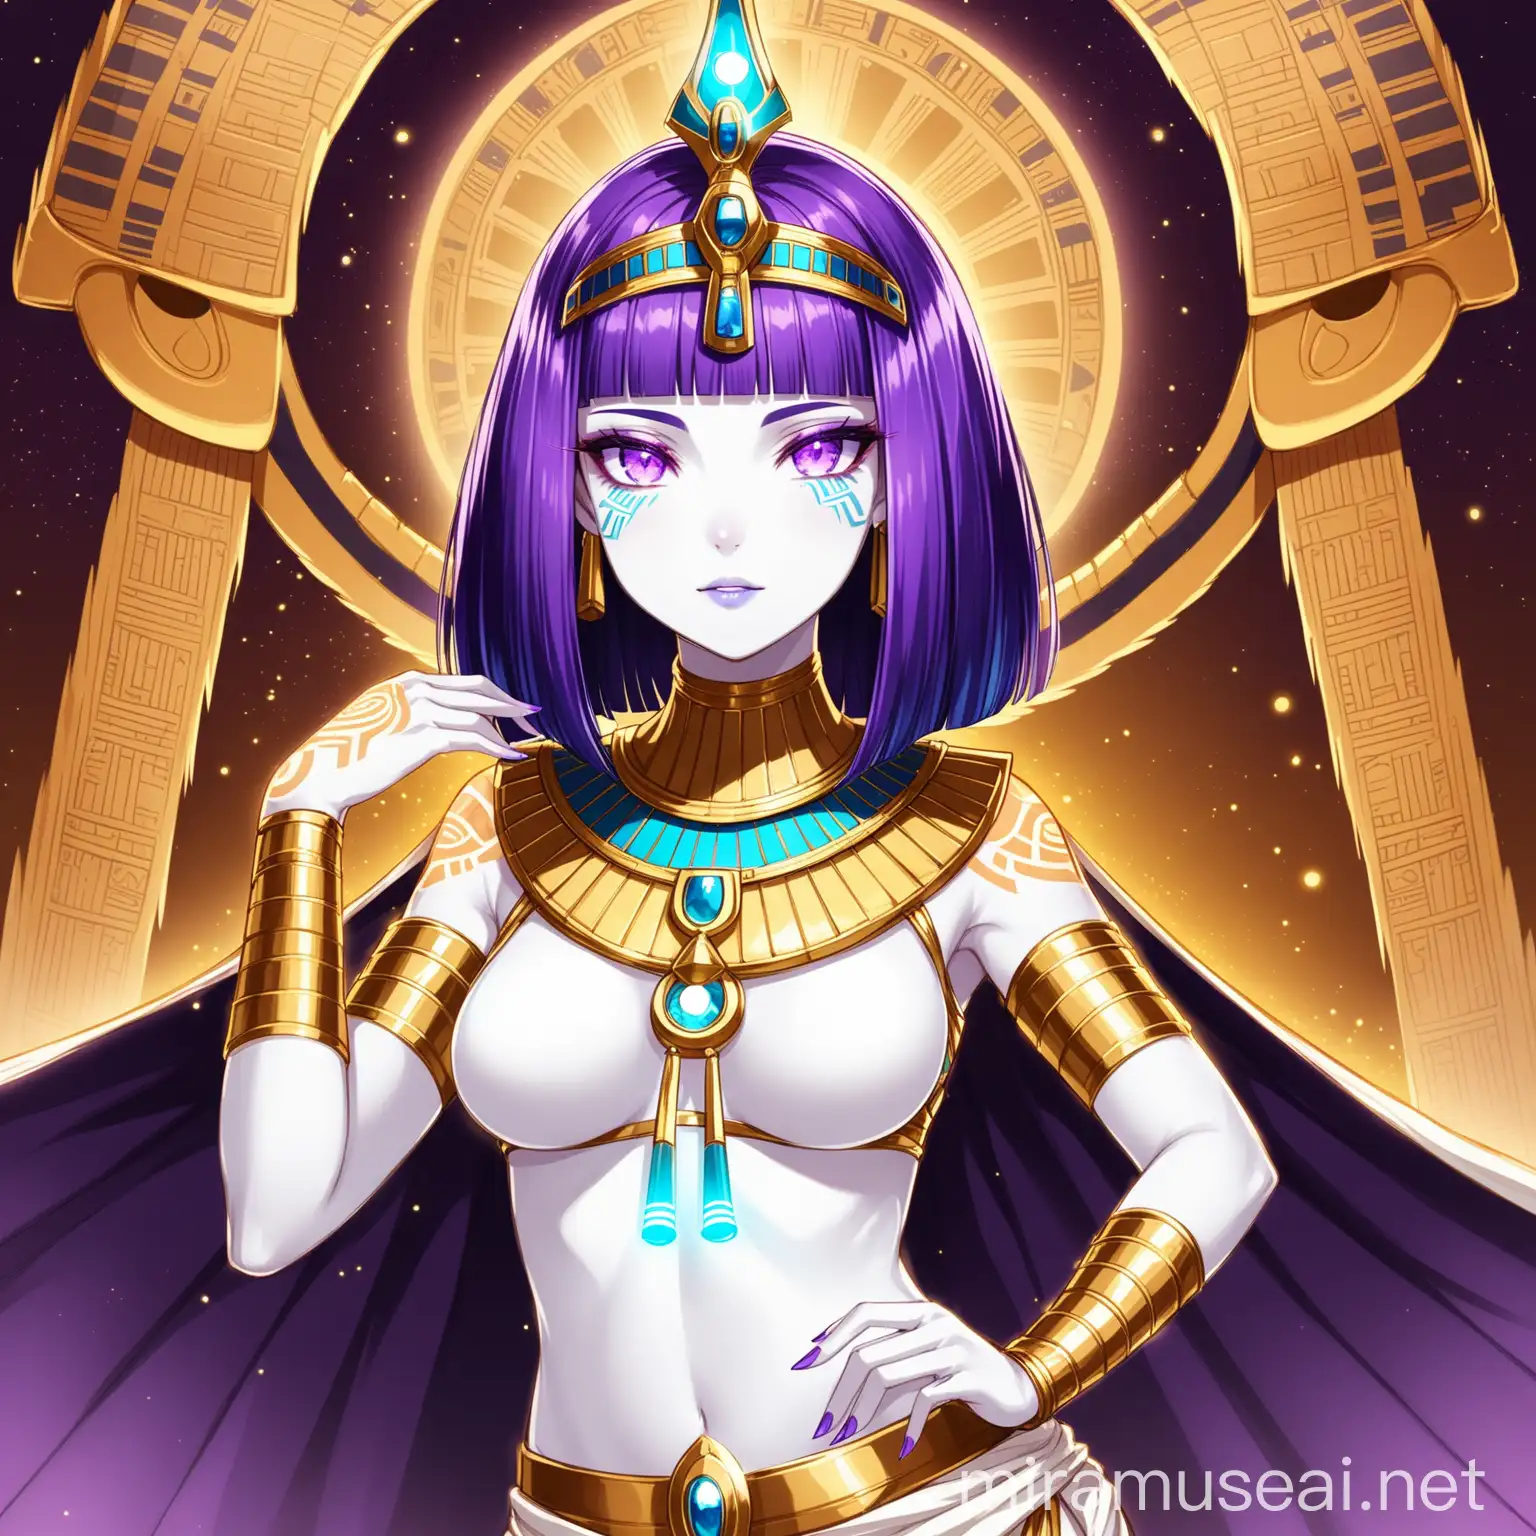 Elegant Anime Fantasy Woman with Luminous Tattoos and Pharaonic Crown